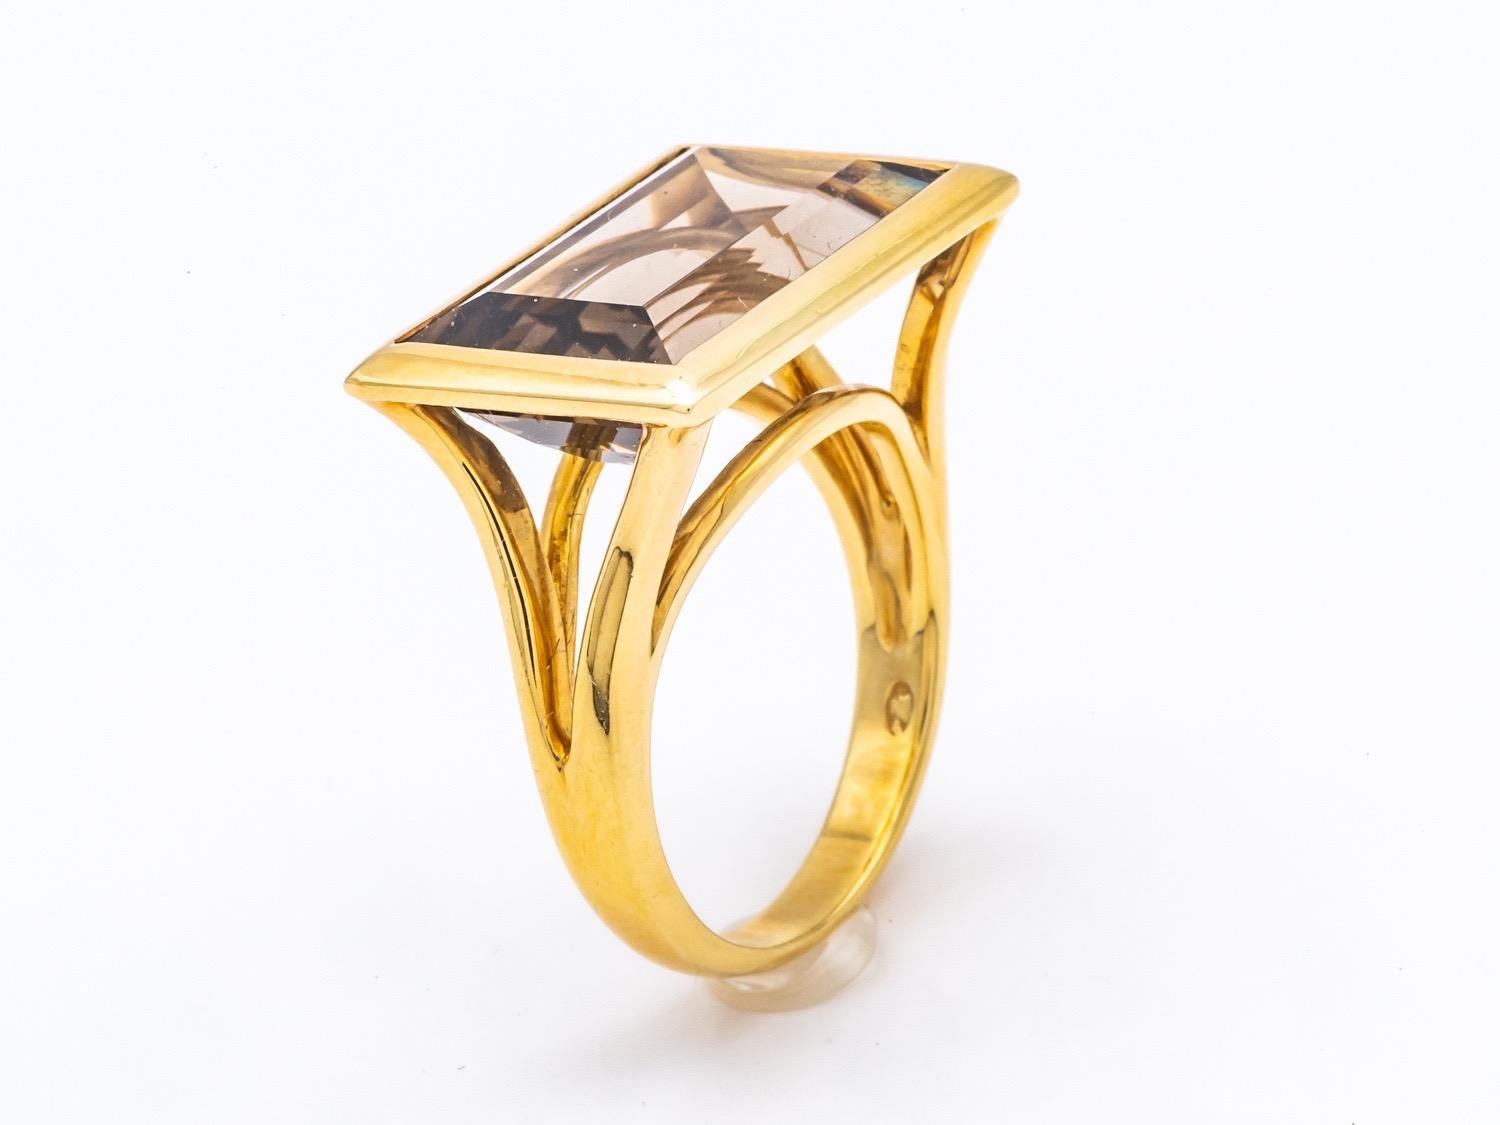 Women's Art Deco Style Ring in 18K Yellow Gold Set with an Emerald Size Smoked Quartz